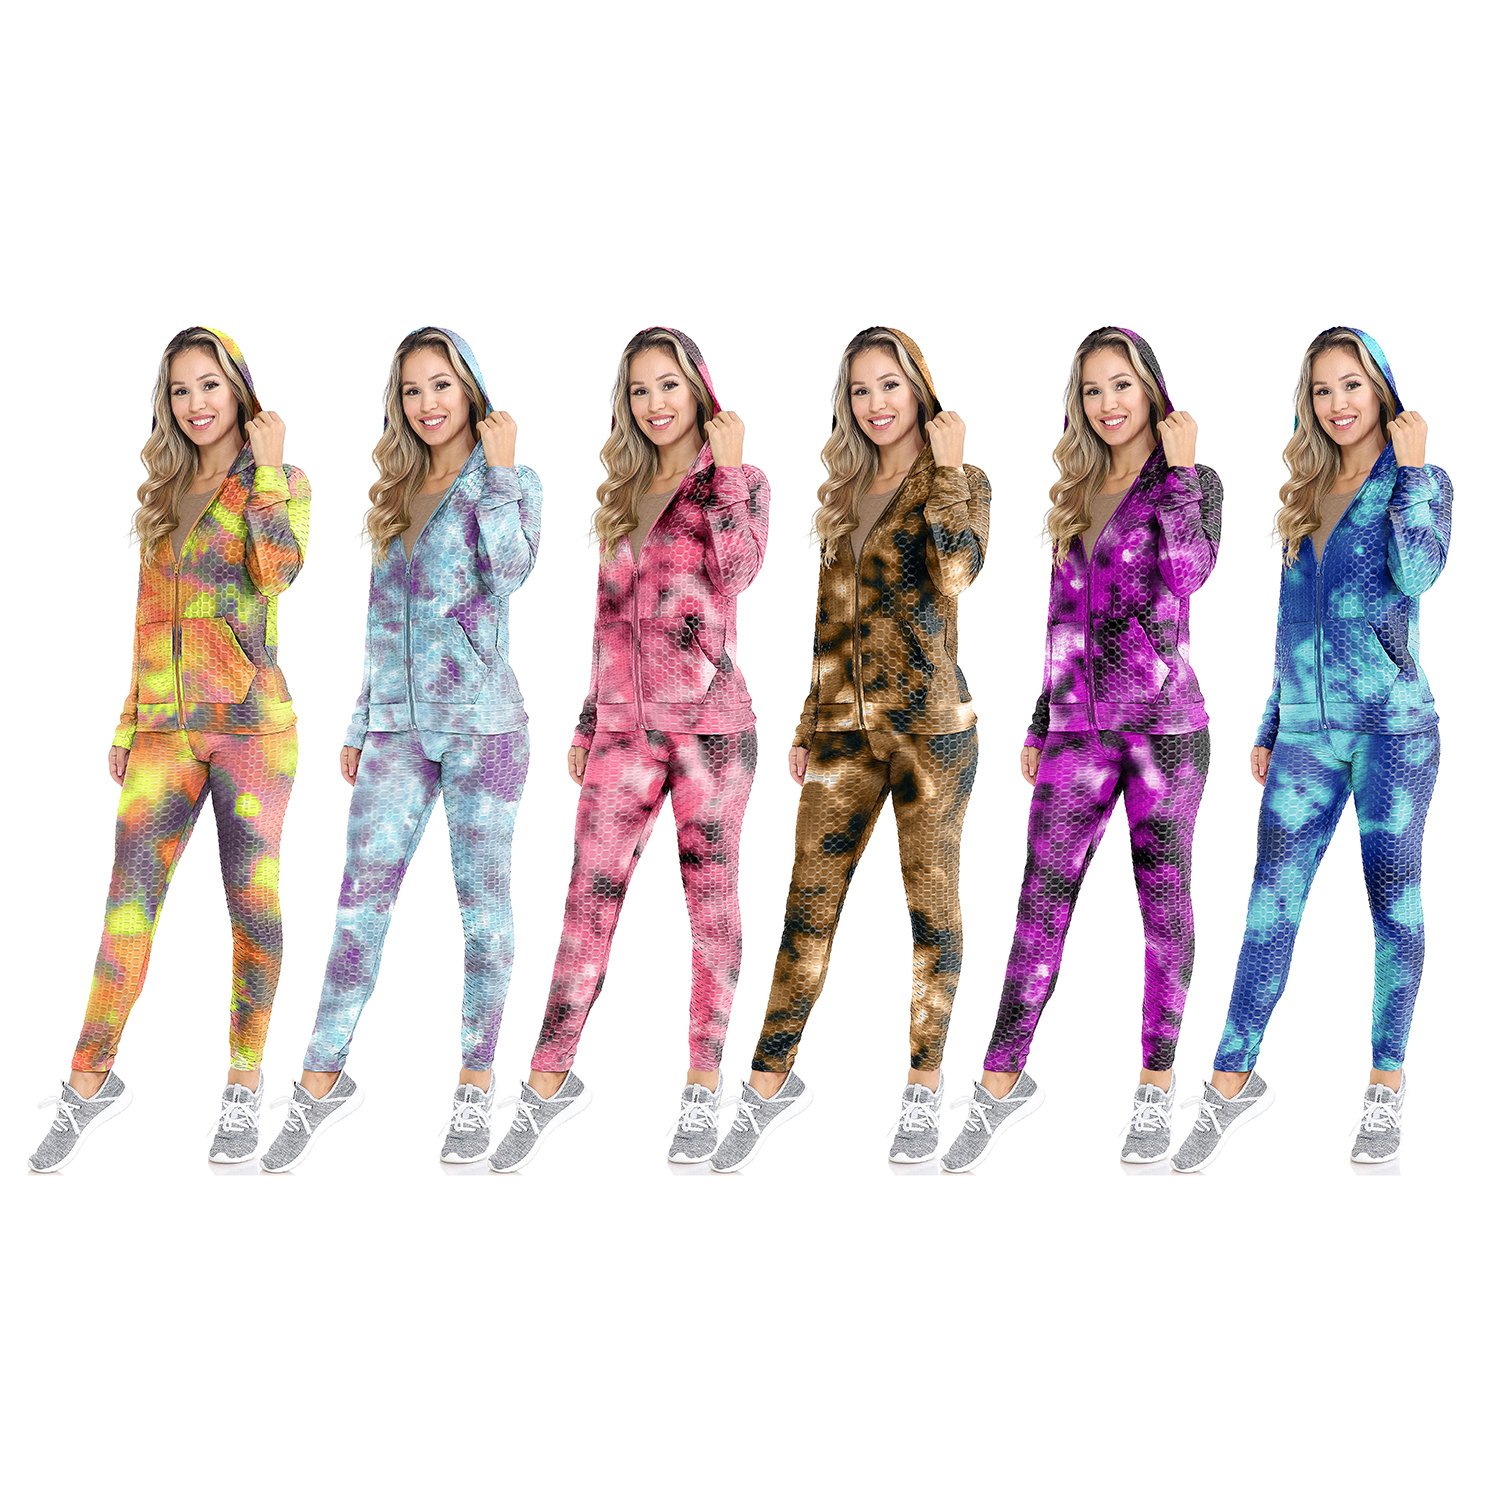 2-Piece Women's Textured Anti Cellulite Body Shaping Jogger Tracksuit With Hoodie - Small/Medium